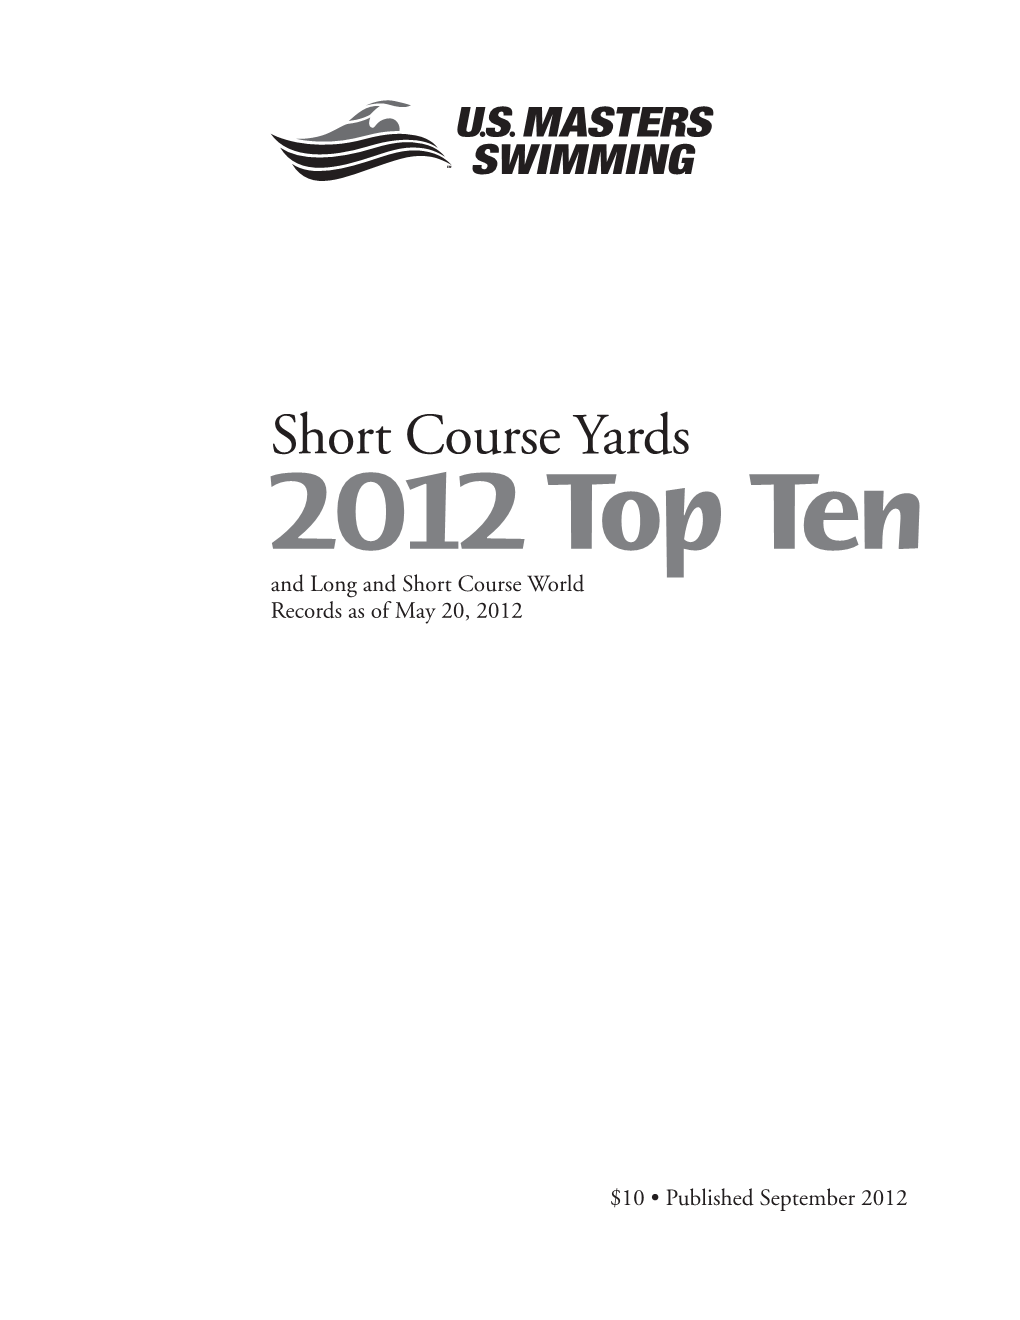 Short Course Yards 2012 Top Ten and Long and Short Course World Records As of May 20, 2012